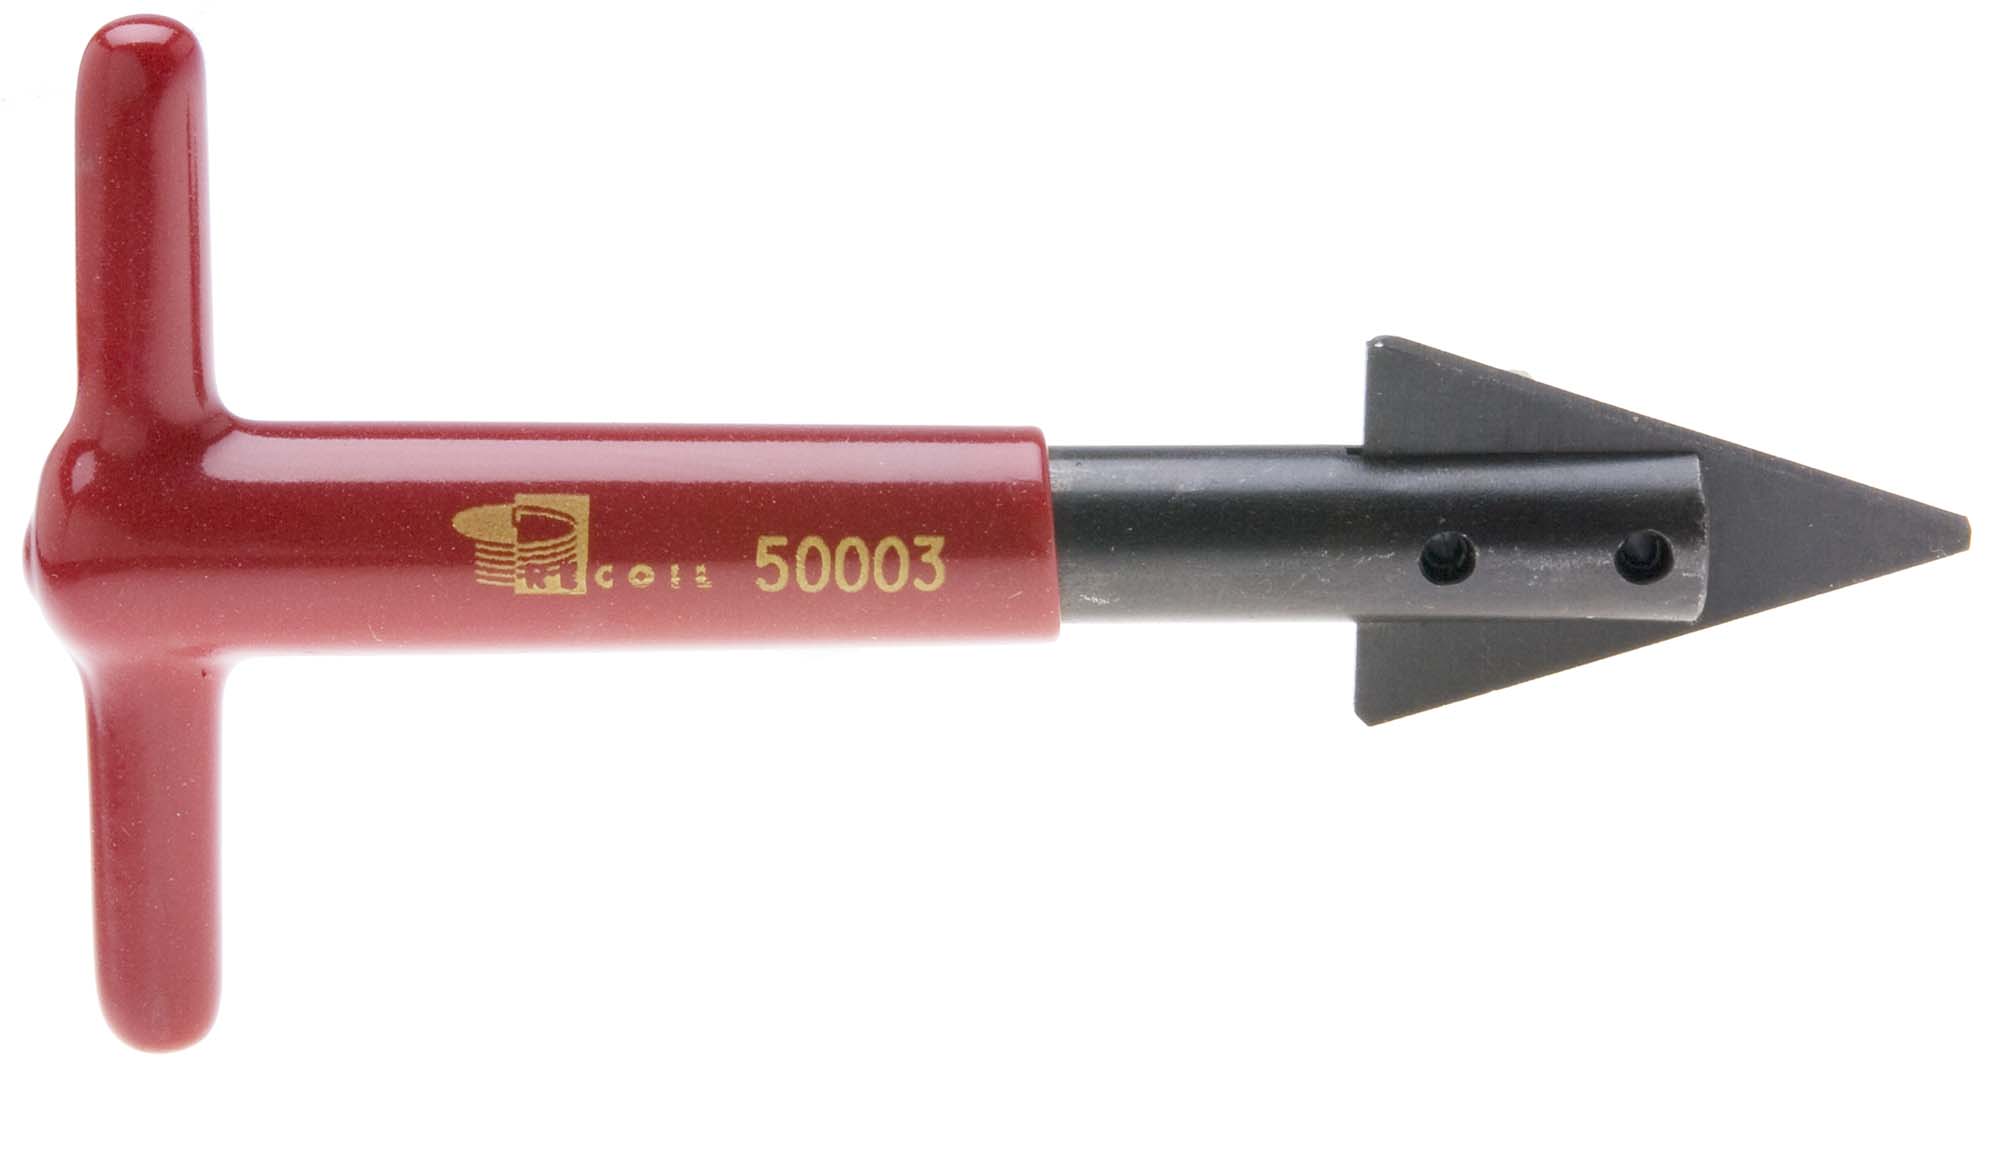 4-40 - 3/8" Recoil Insert Extracting Tool